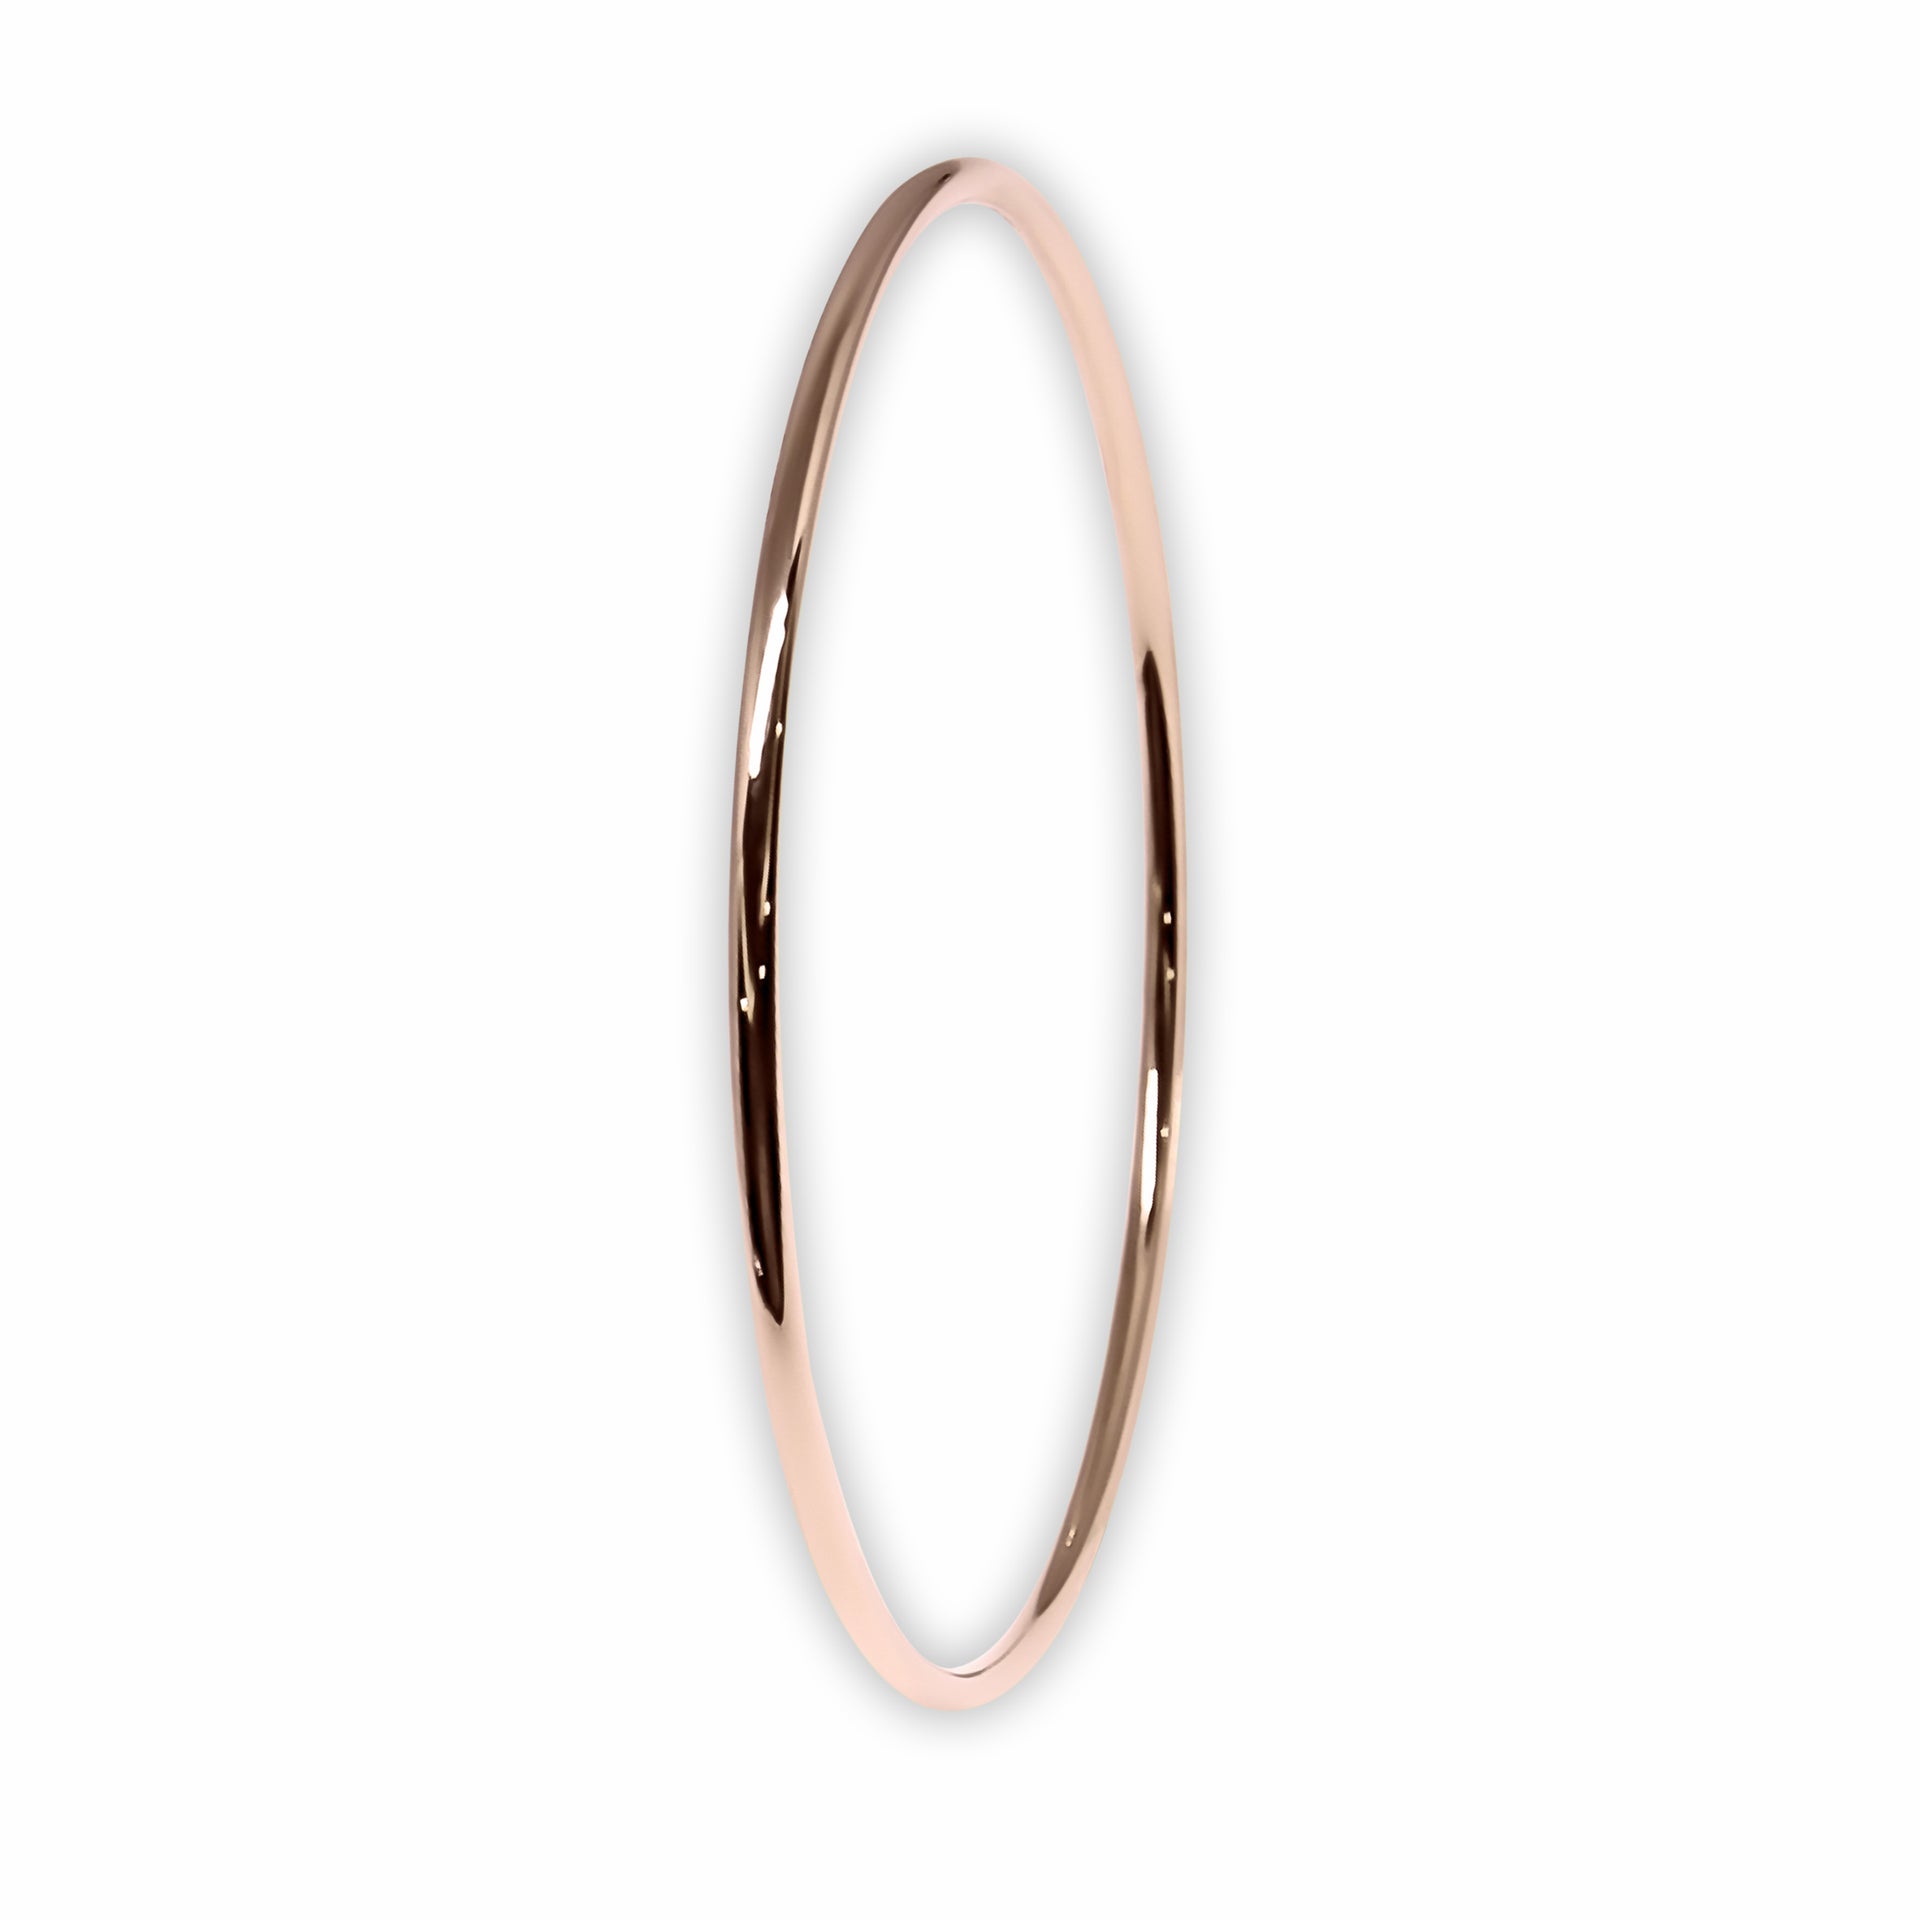 Bracelet EARTH IS ROUND 2mm rond or rouge 18k 750